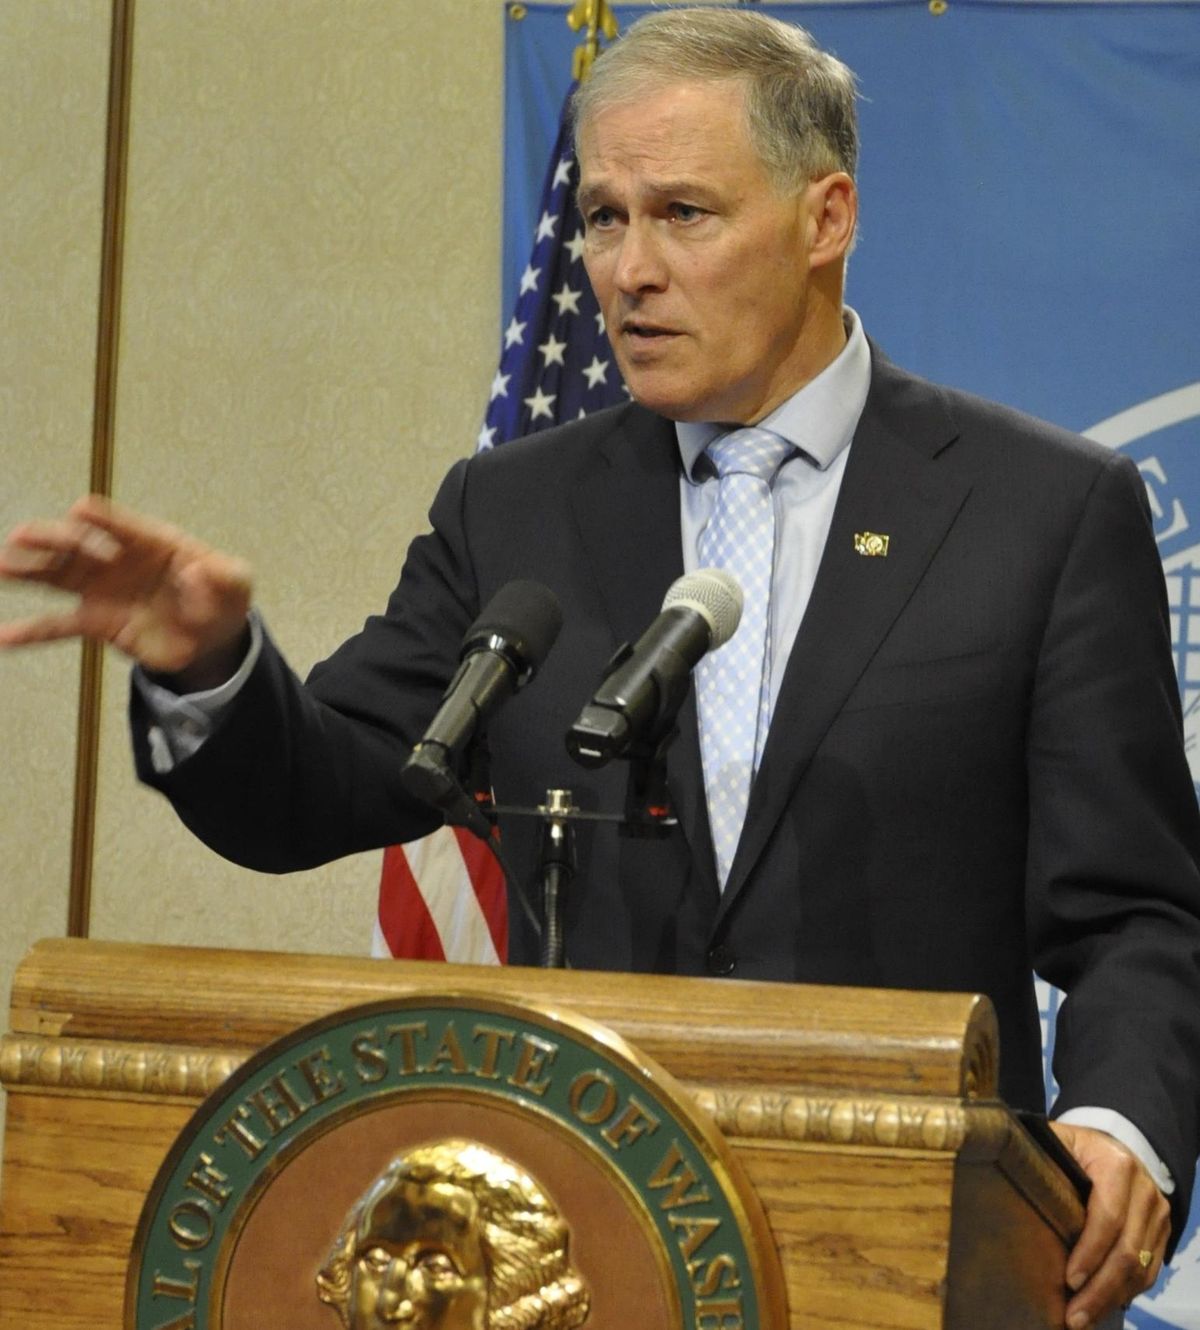 OLYMPIA – Gov. Jay Inslee answers questions at a press conference after announcing he is calling the Legislature into its third special session. (Jim Camden / The Spokesman-Review)